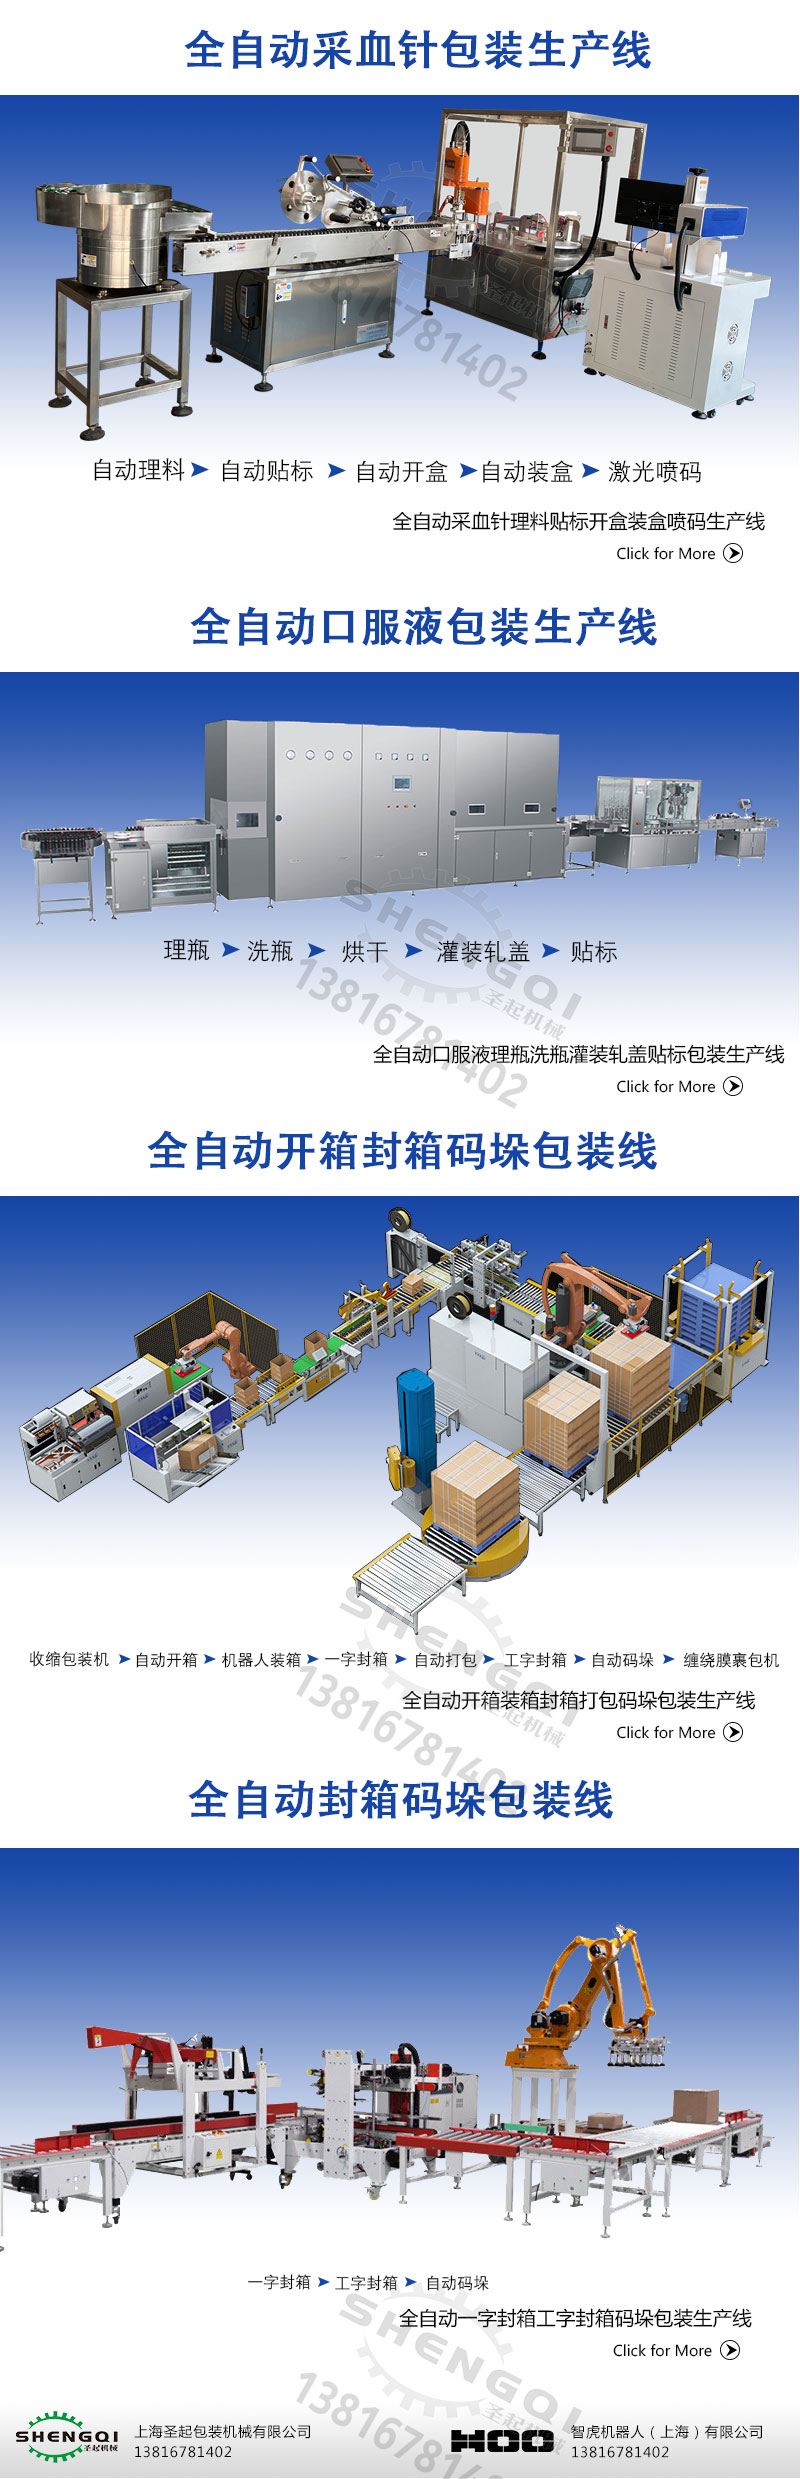 Fully automatic box filling machine, bottle filling and folding machine, cosmetics and drugs automatic paper box packaging machine